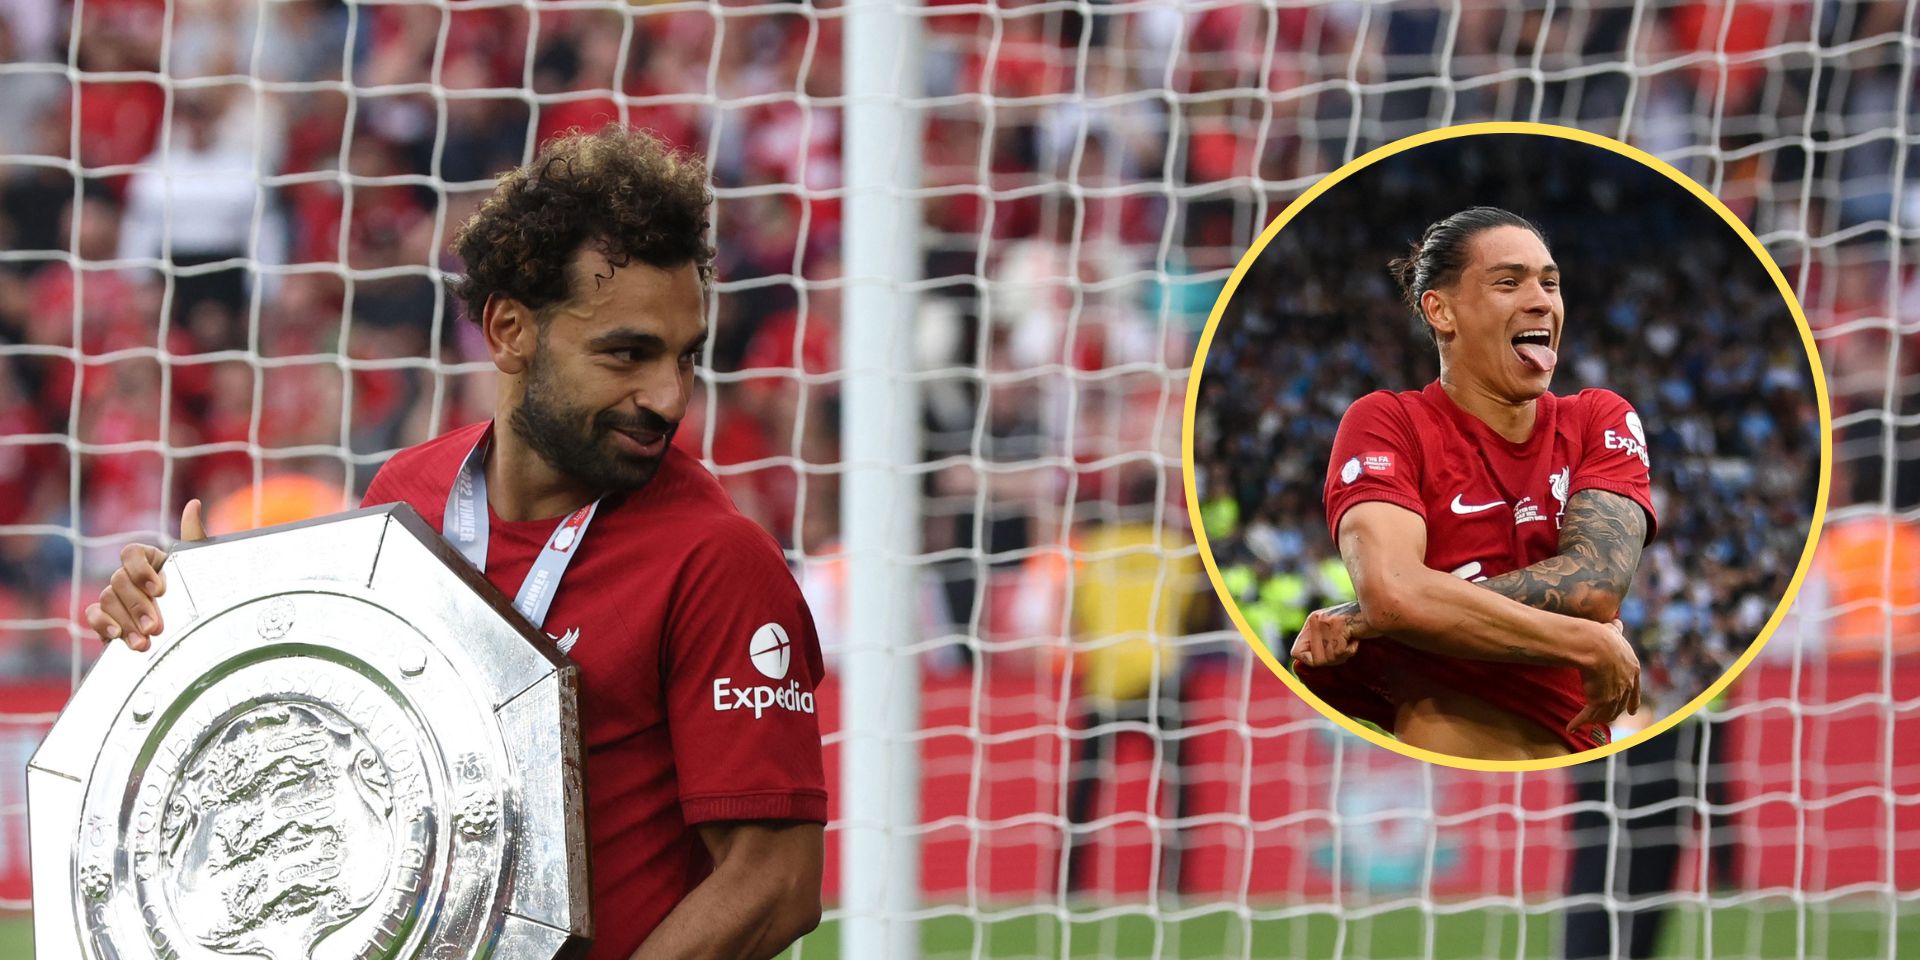 Darwin Nunez opens up on ‘really nice’ Salah gesture & why he dedicated first goal to Egyptian forward